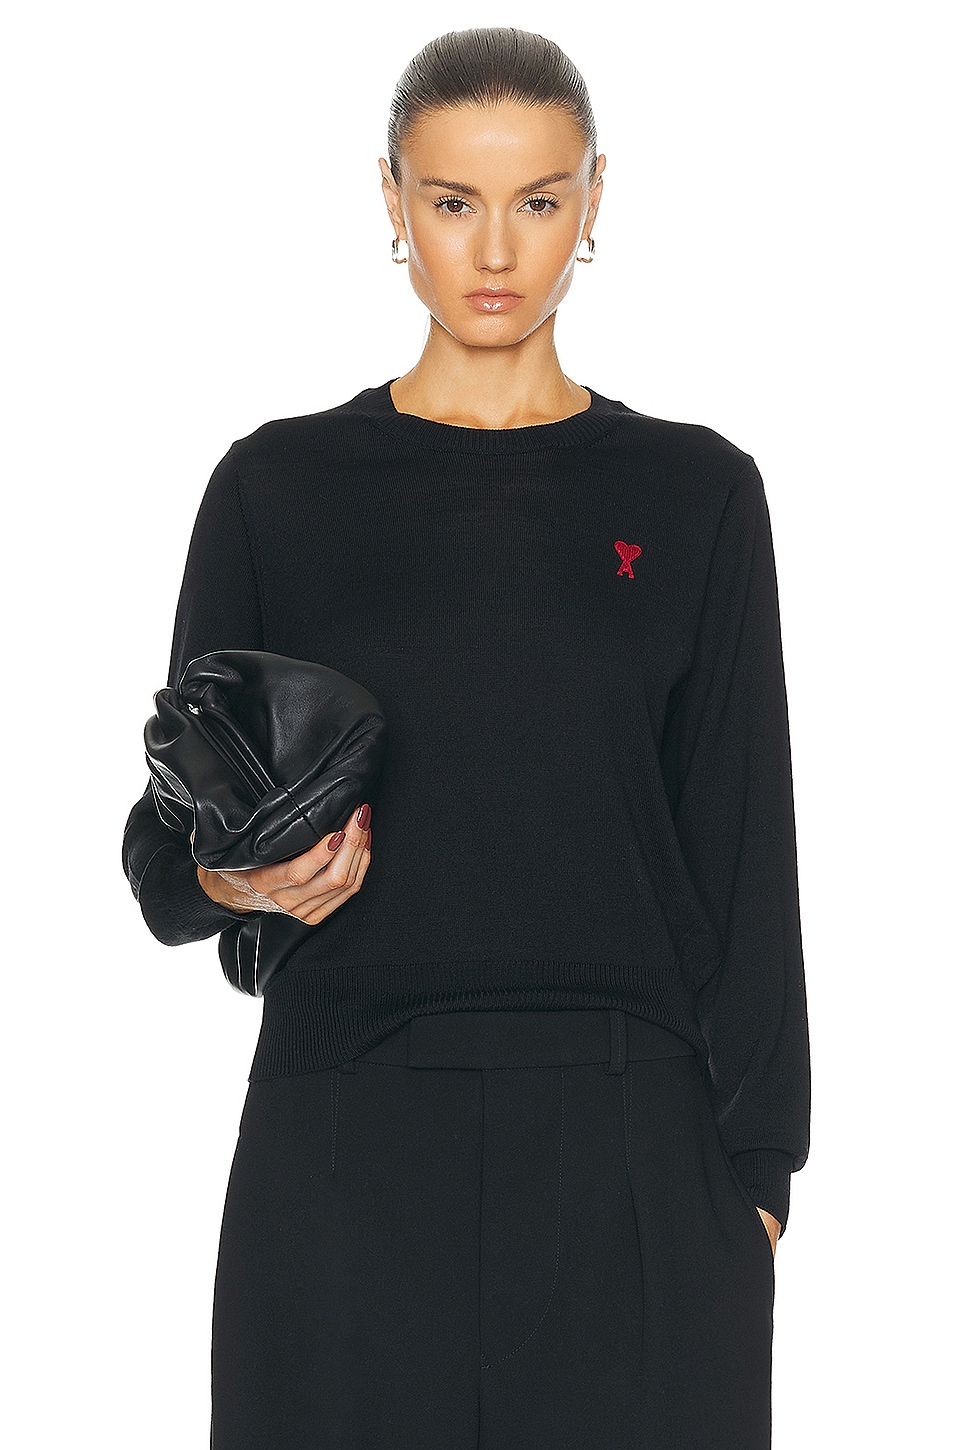 ADC Sweater in Black